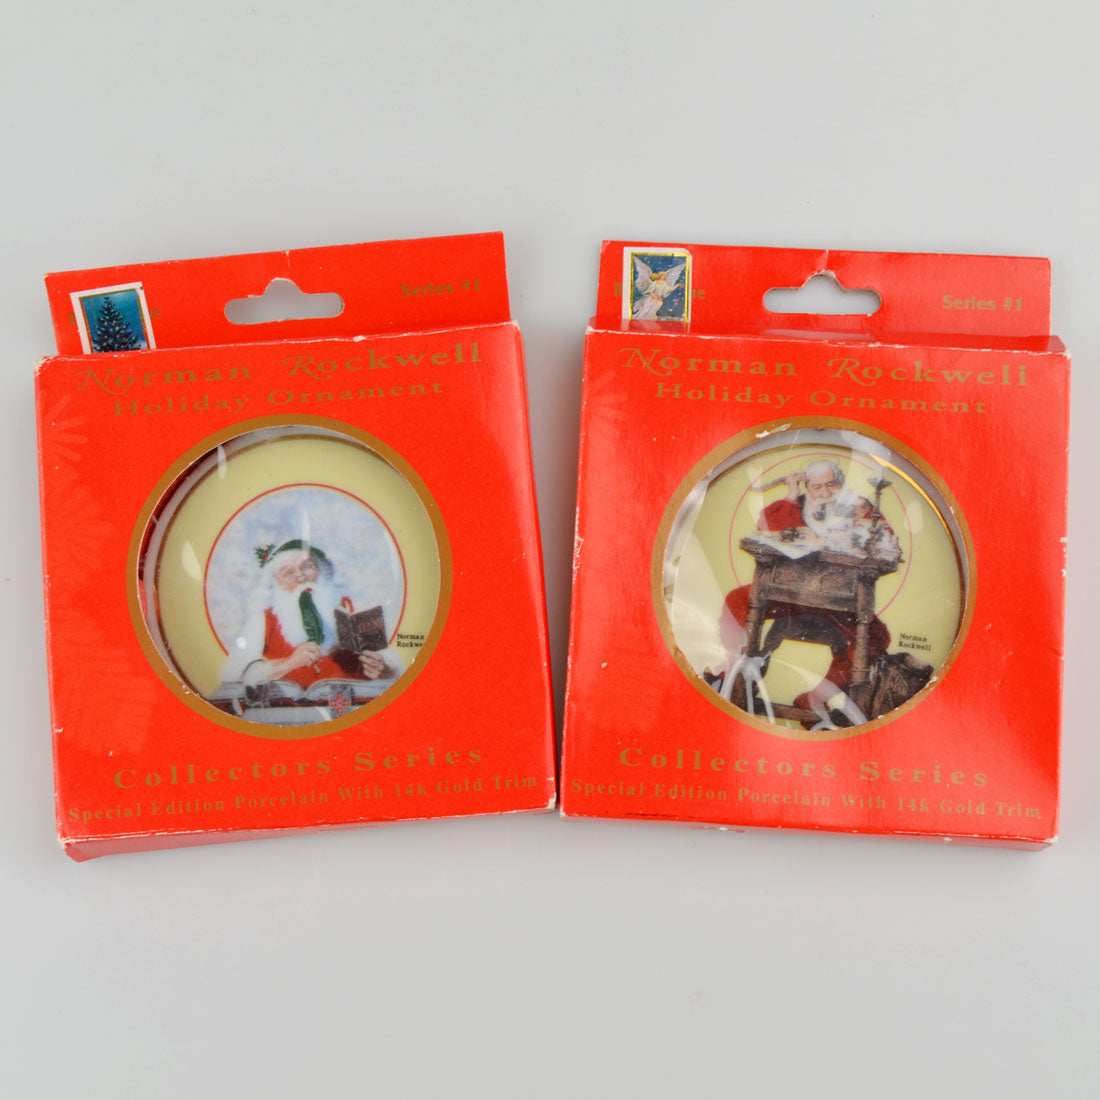 Vintage Norman Rockwell Collectible Ornaments "Santa" - 1999 - Lot of 2